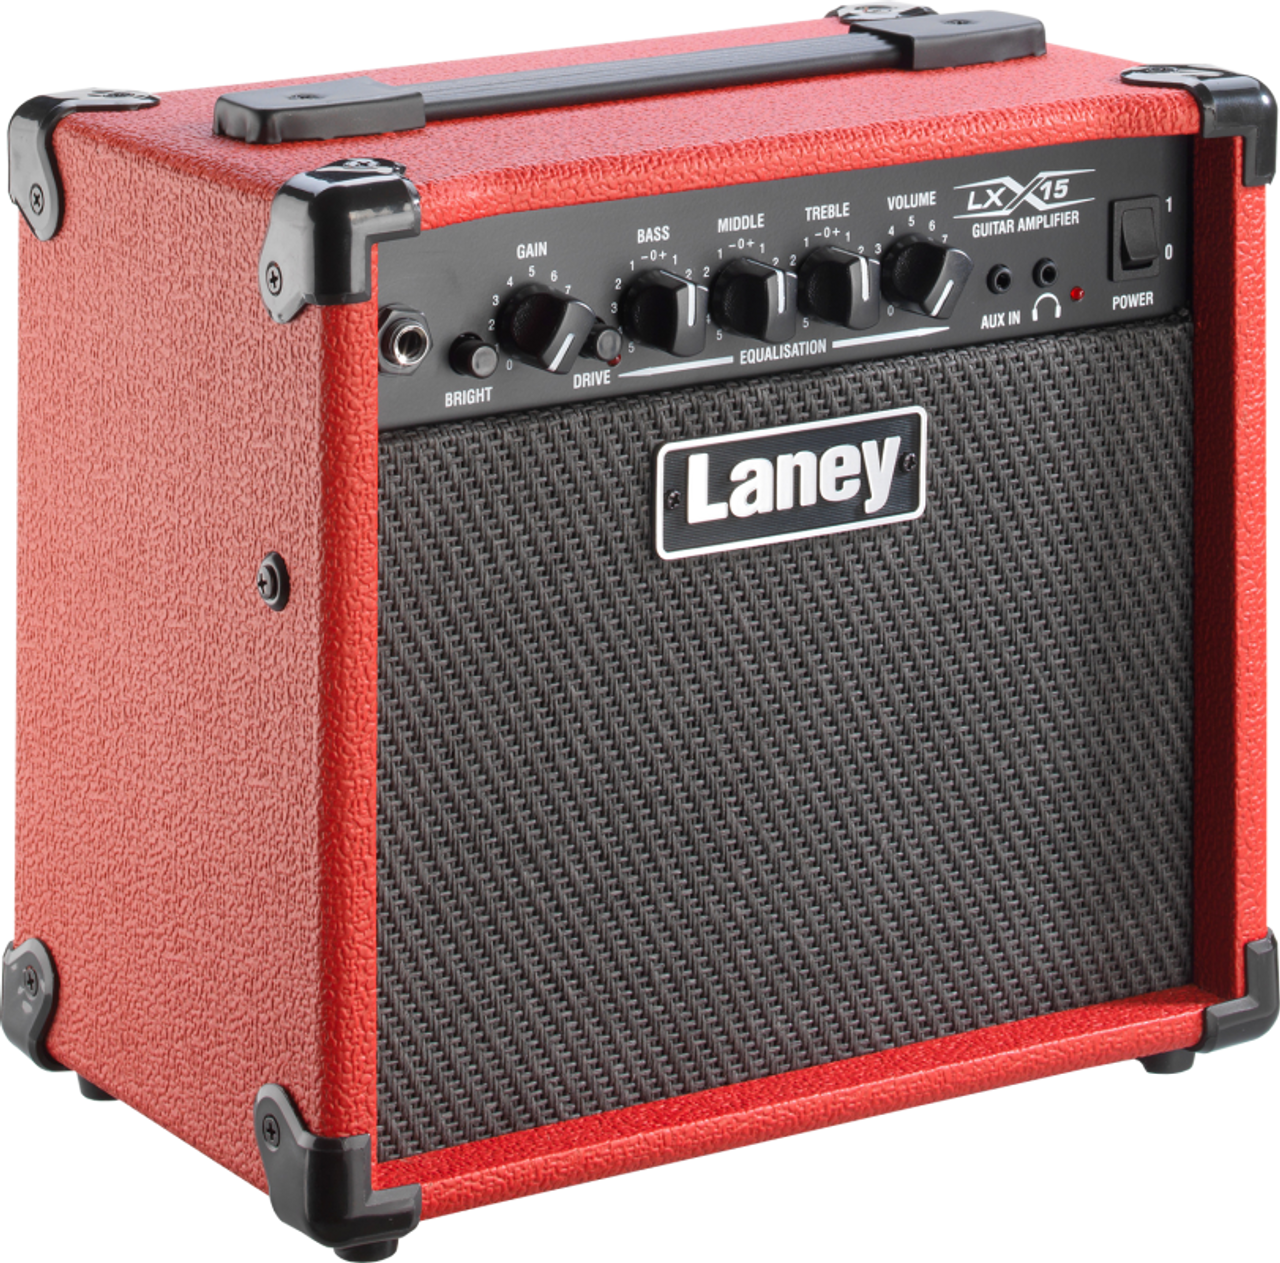 Laney LX15 Guitar Combo Red